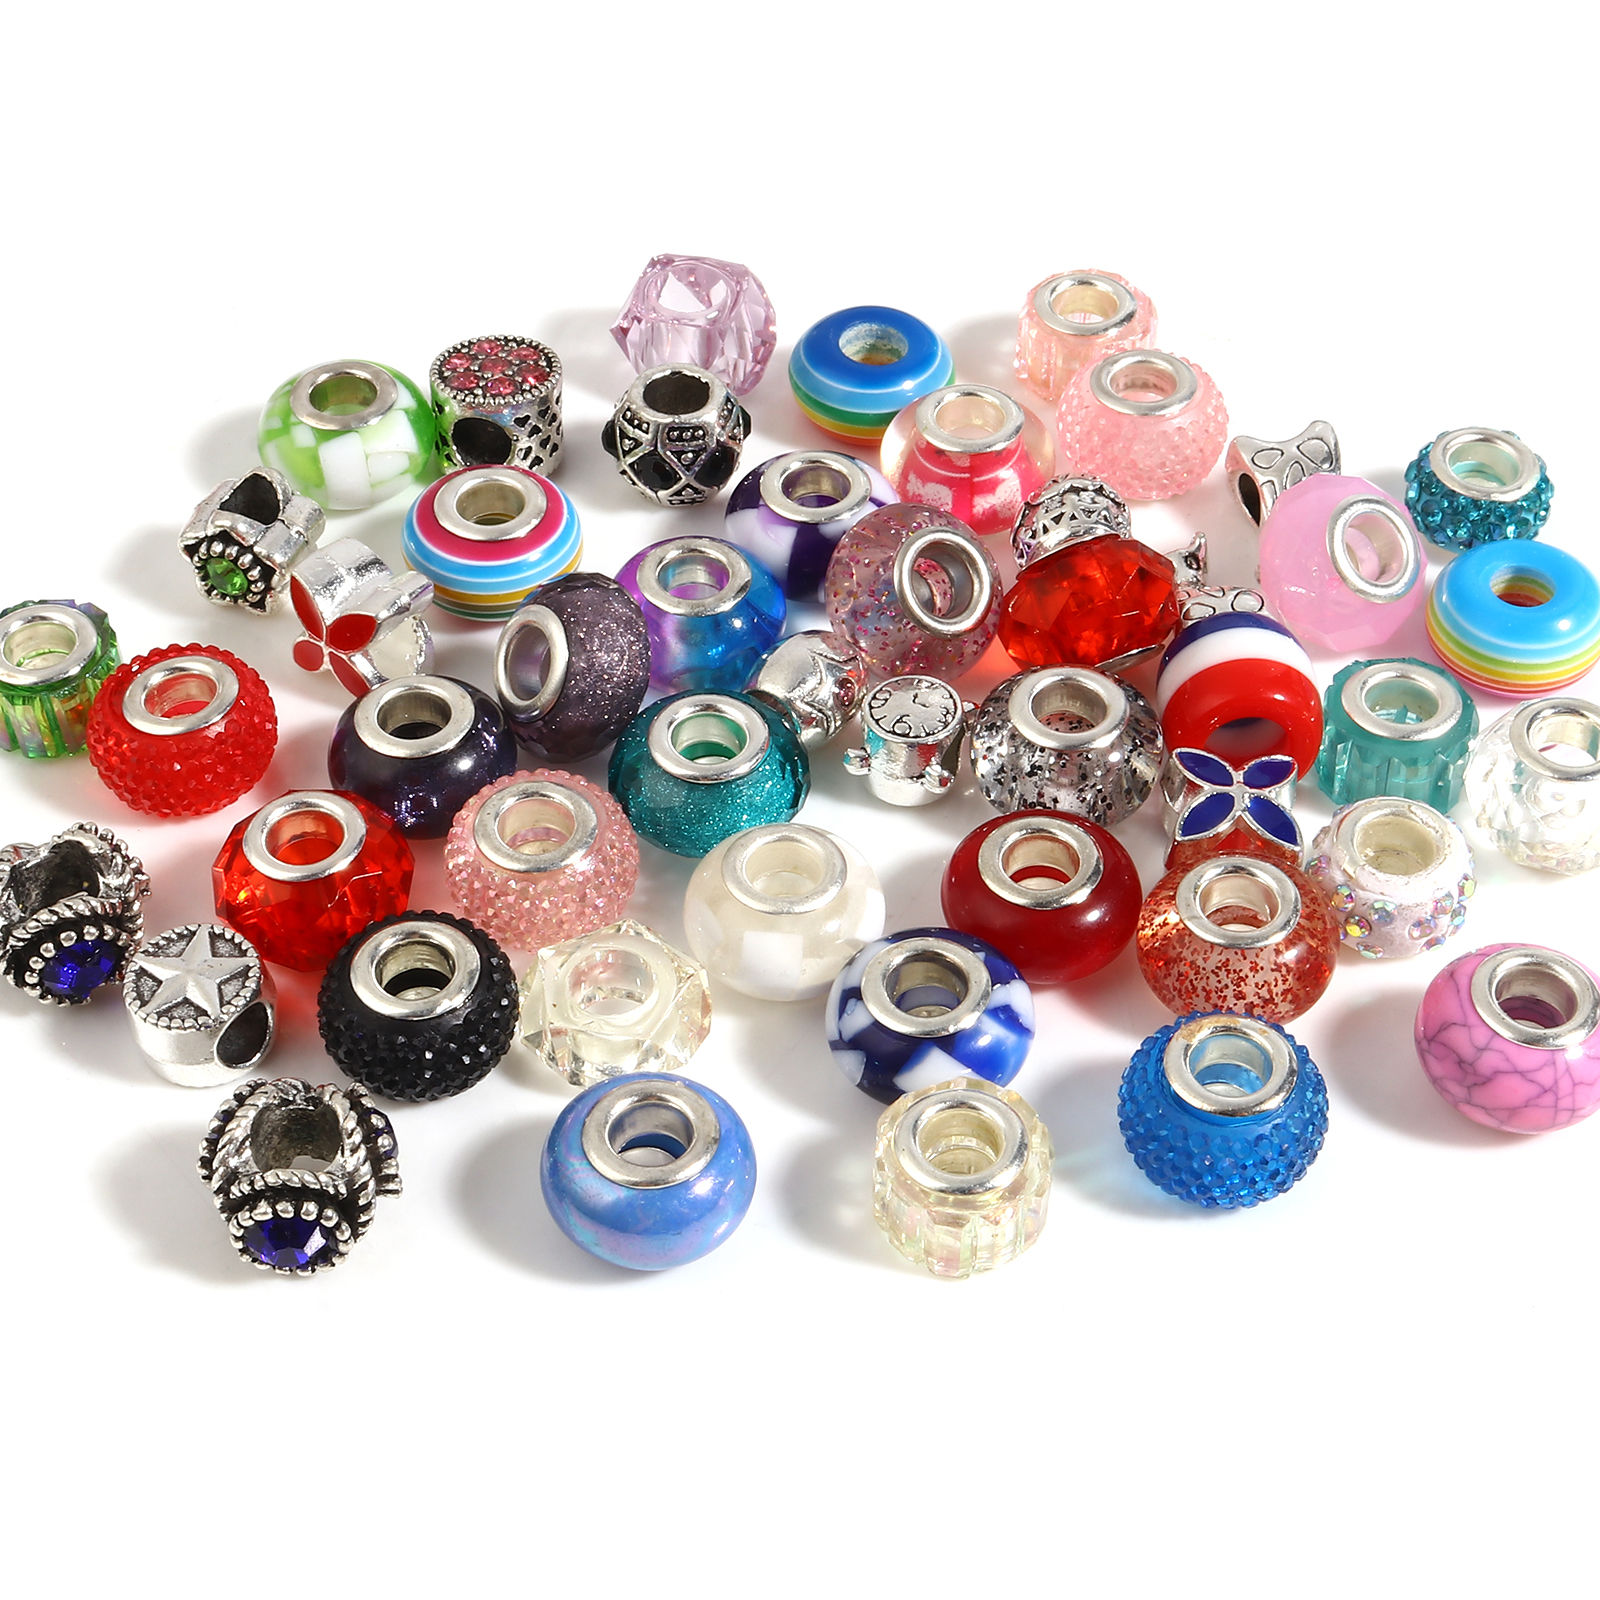 Picture of Zinc Based Alloy & Acrylic Large Hole Charm Beads Silver Tone Multicolor Round At Random 14mm Dia., 9mm x 8mm, Hole: Approx 5.1mm - 4.5mm, 1 Set